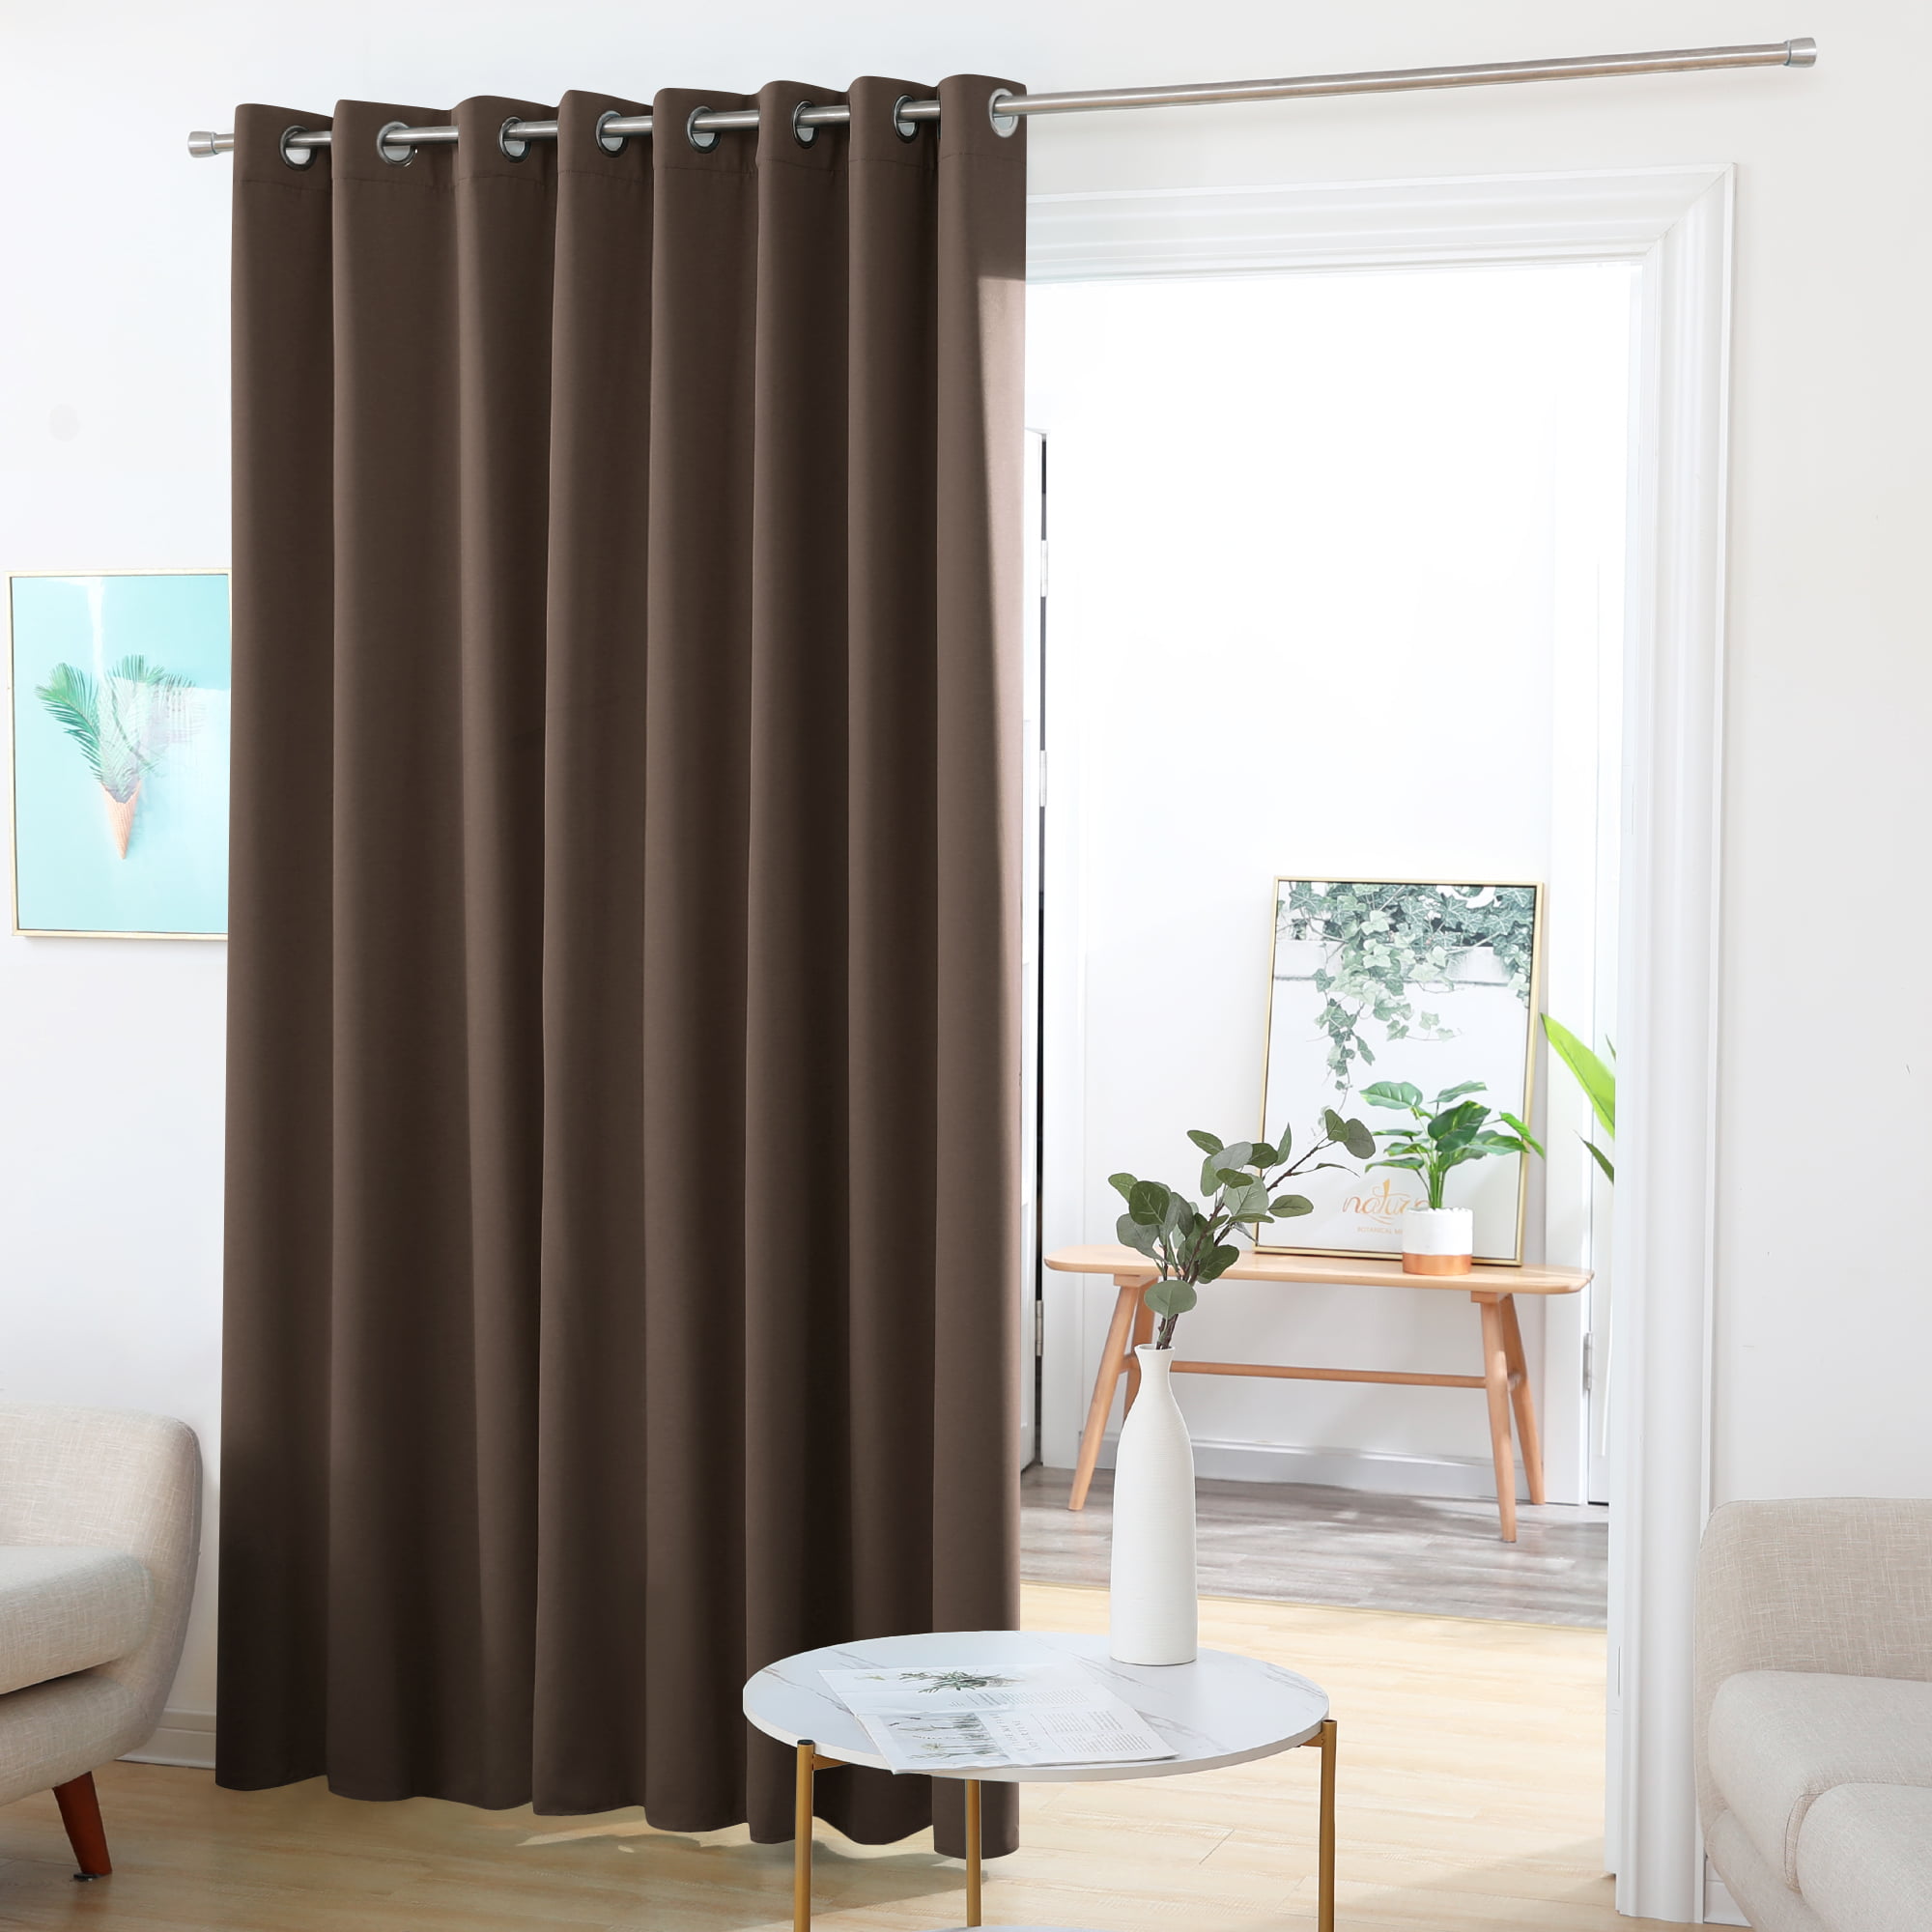 Deconovo Blackout Curtains 1 Panel Wide Width Curtain Room Darkening Shades Thermal Insulared Blinds Room Divider Curtain for Bedroom 80 x 84 Inch Dark Grey 1 Drape